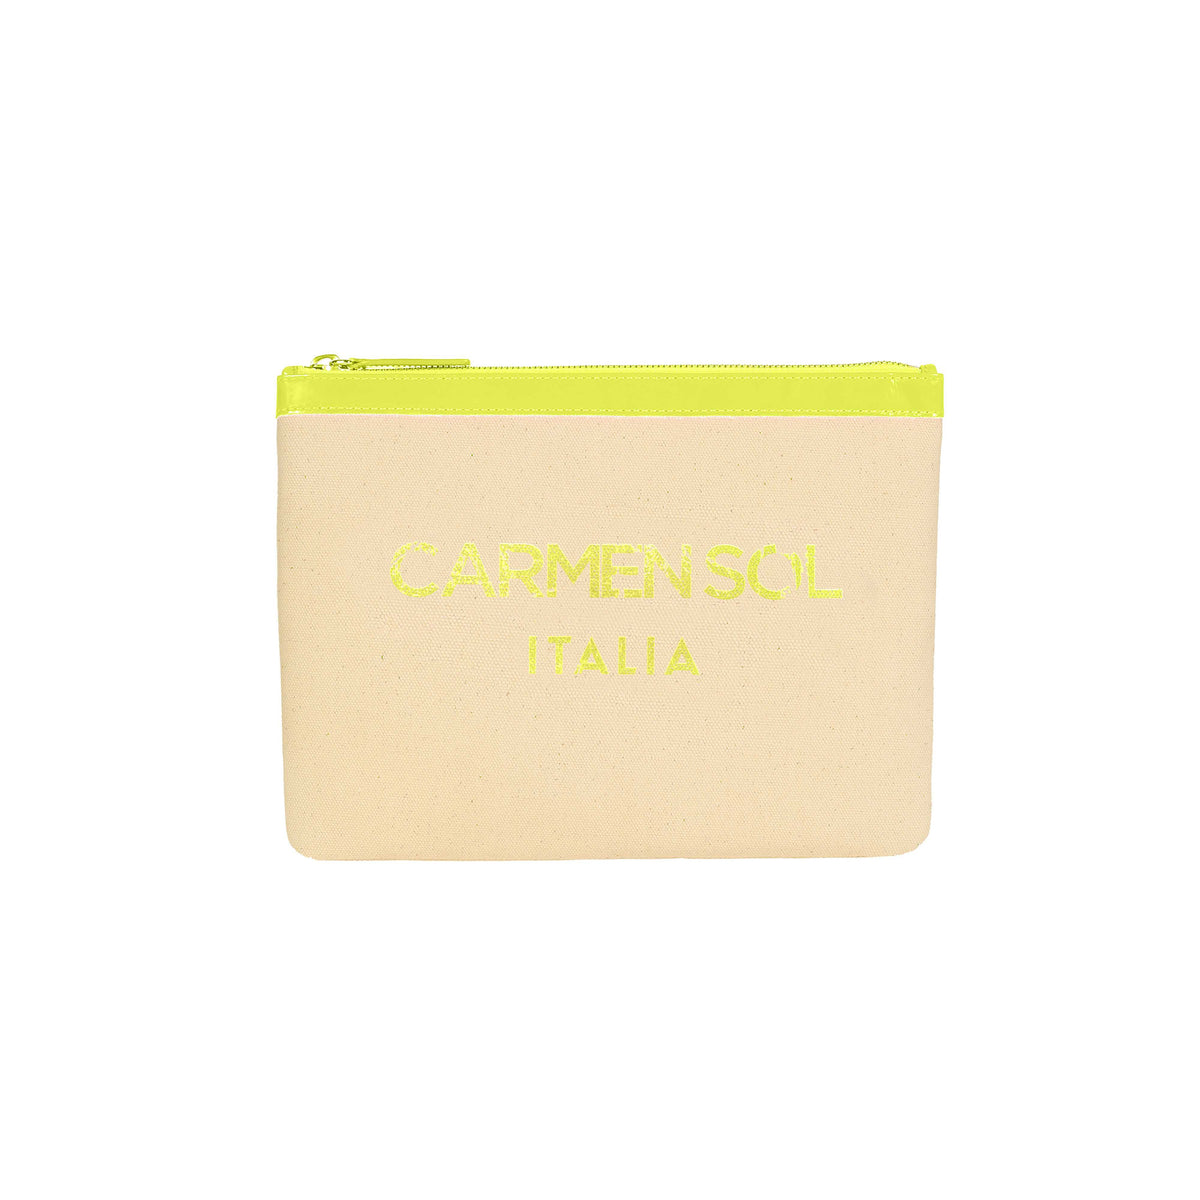 neon yellow canvas purse perfect for any outfit